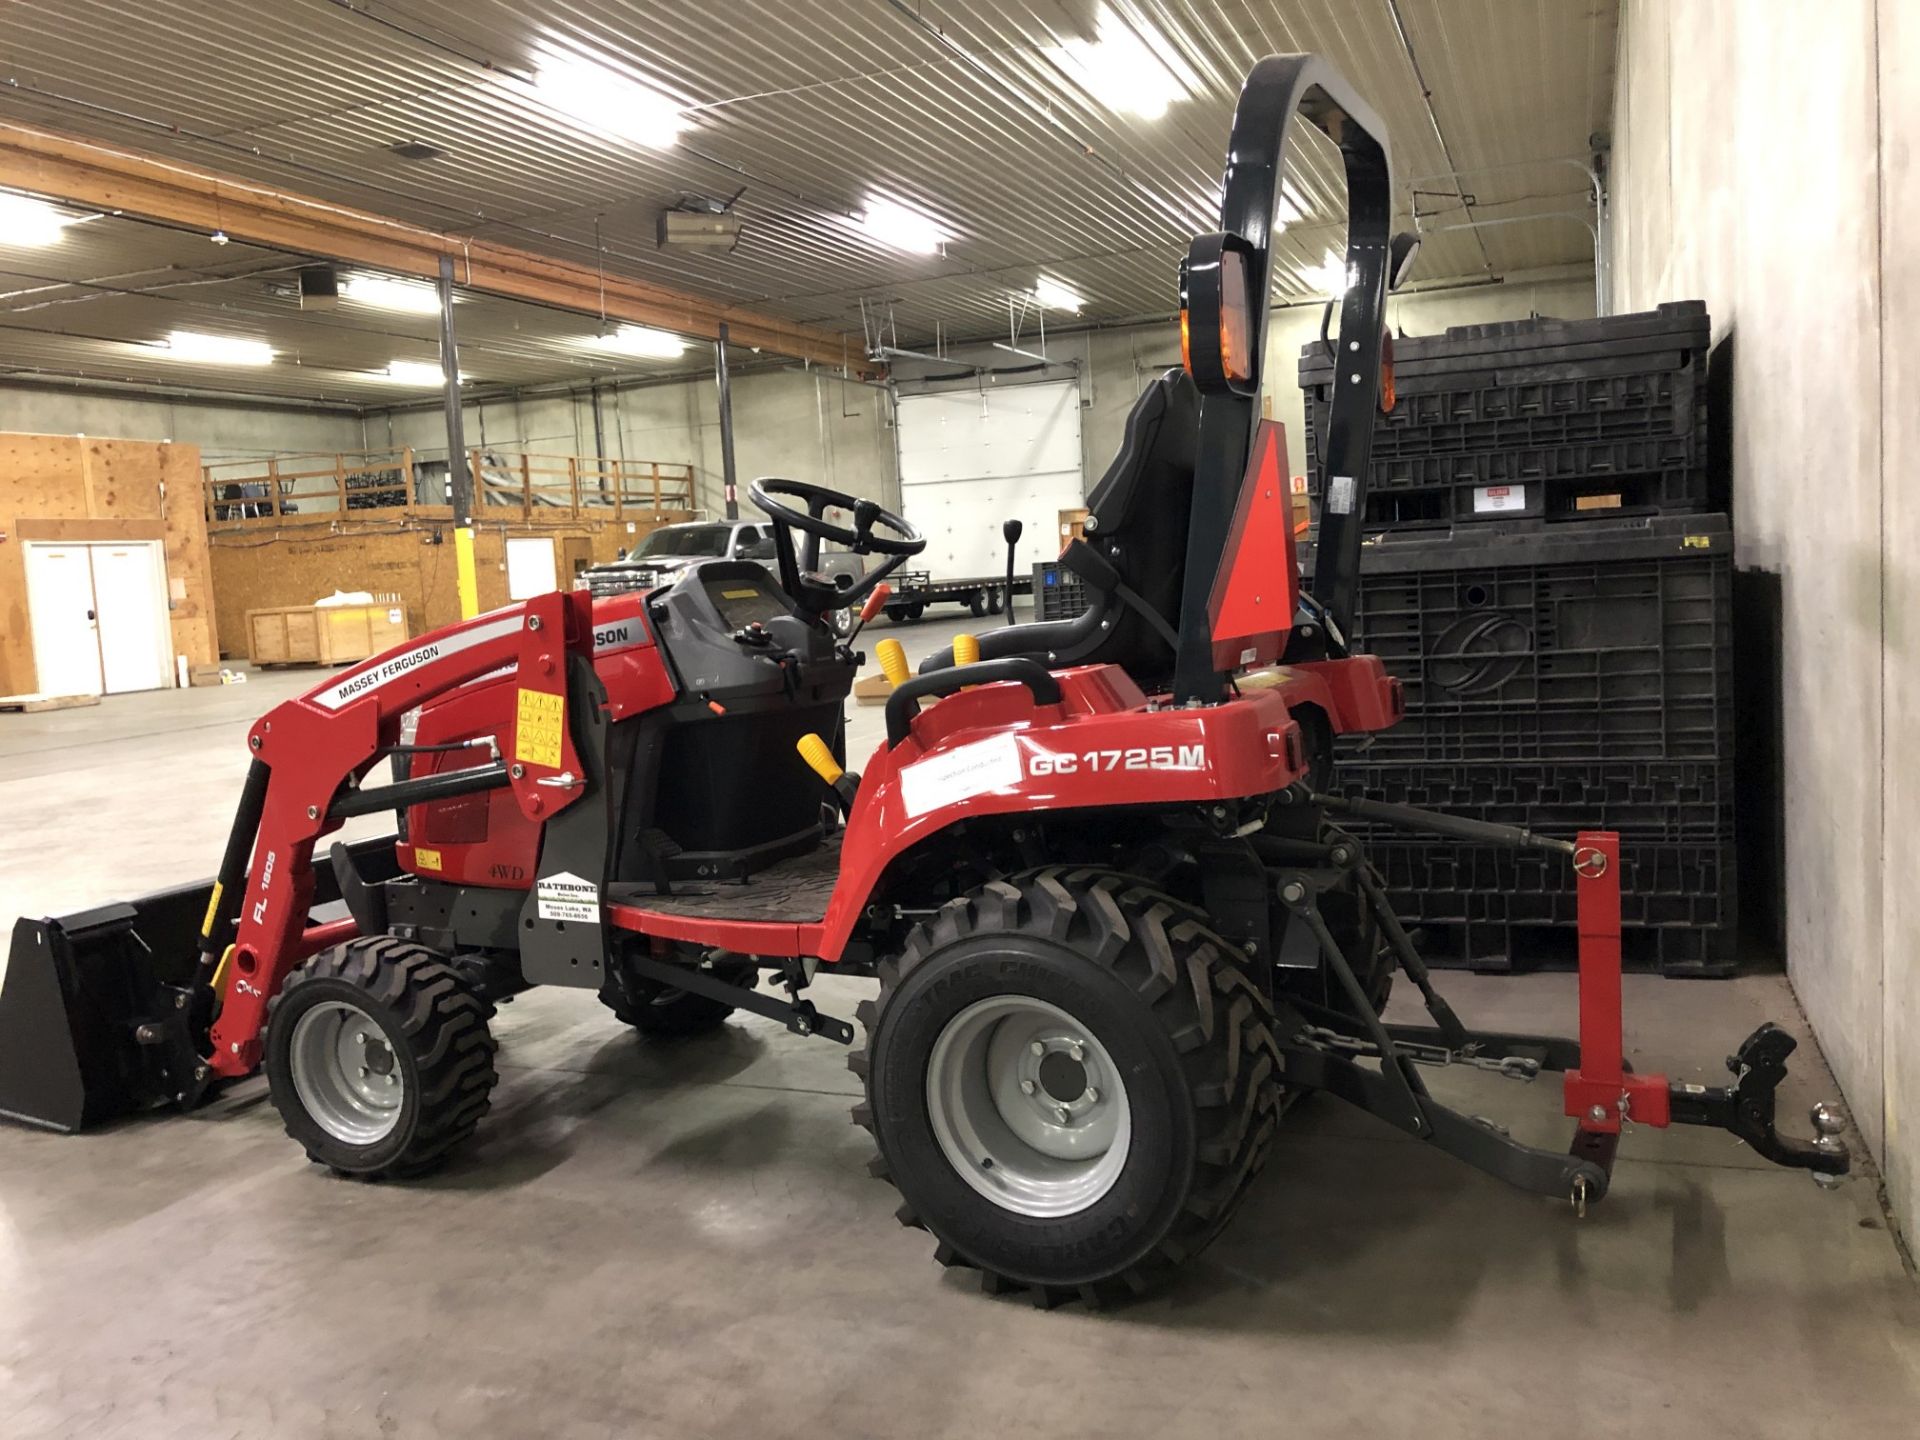 2019 Massey Ferguson GC1725M Tractor w/ Front Loader - Image 4 of 11